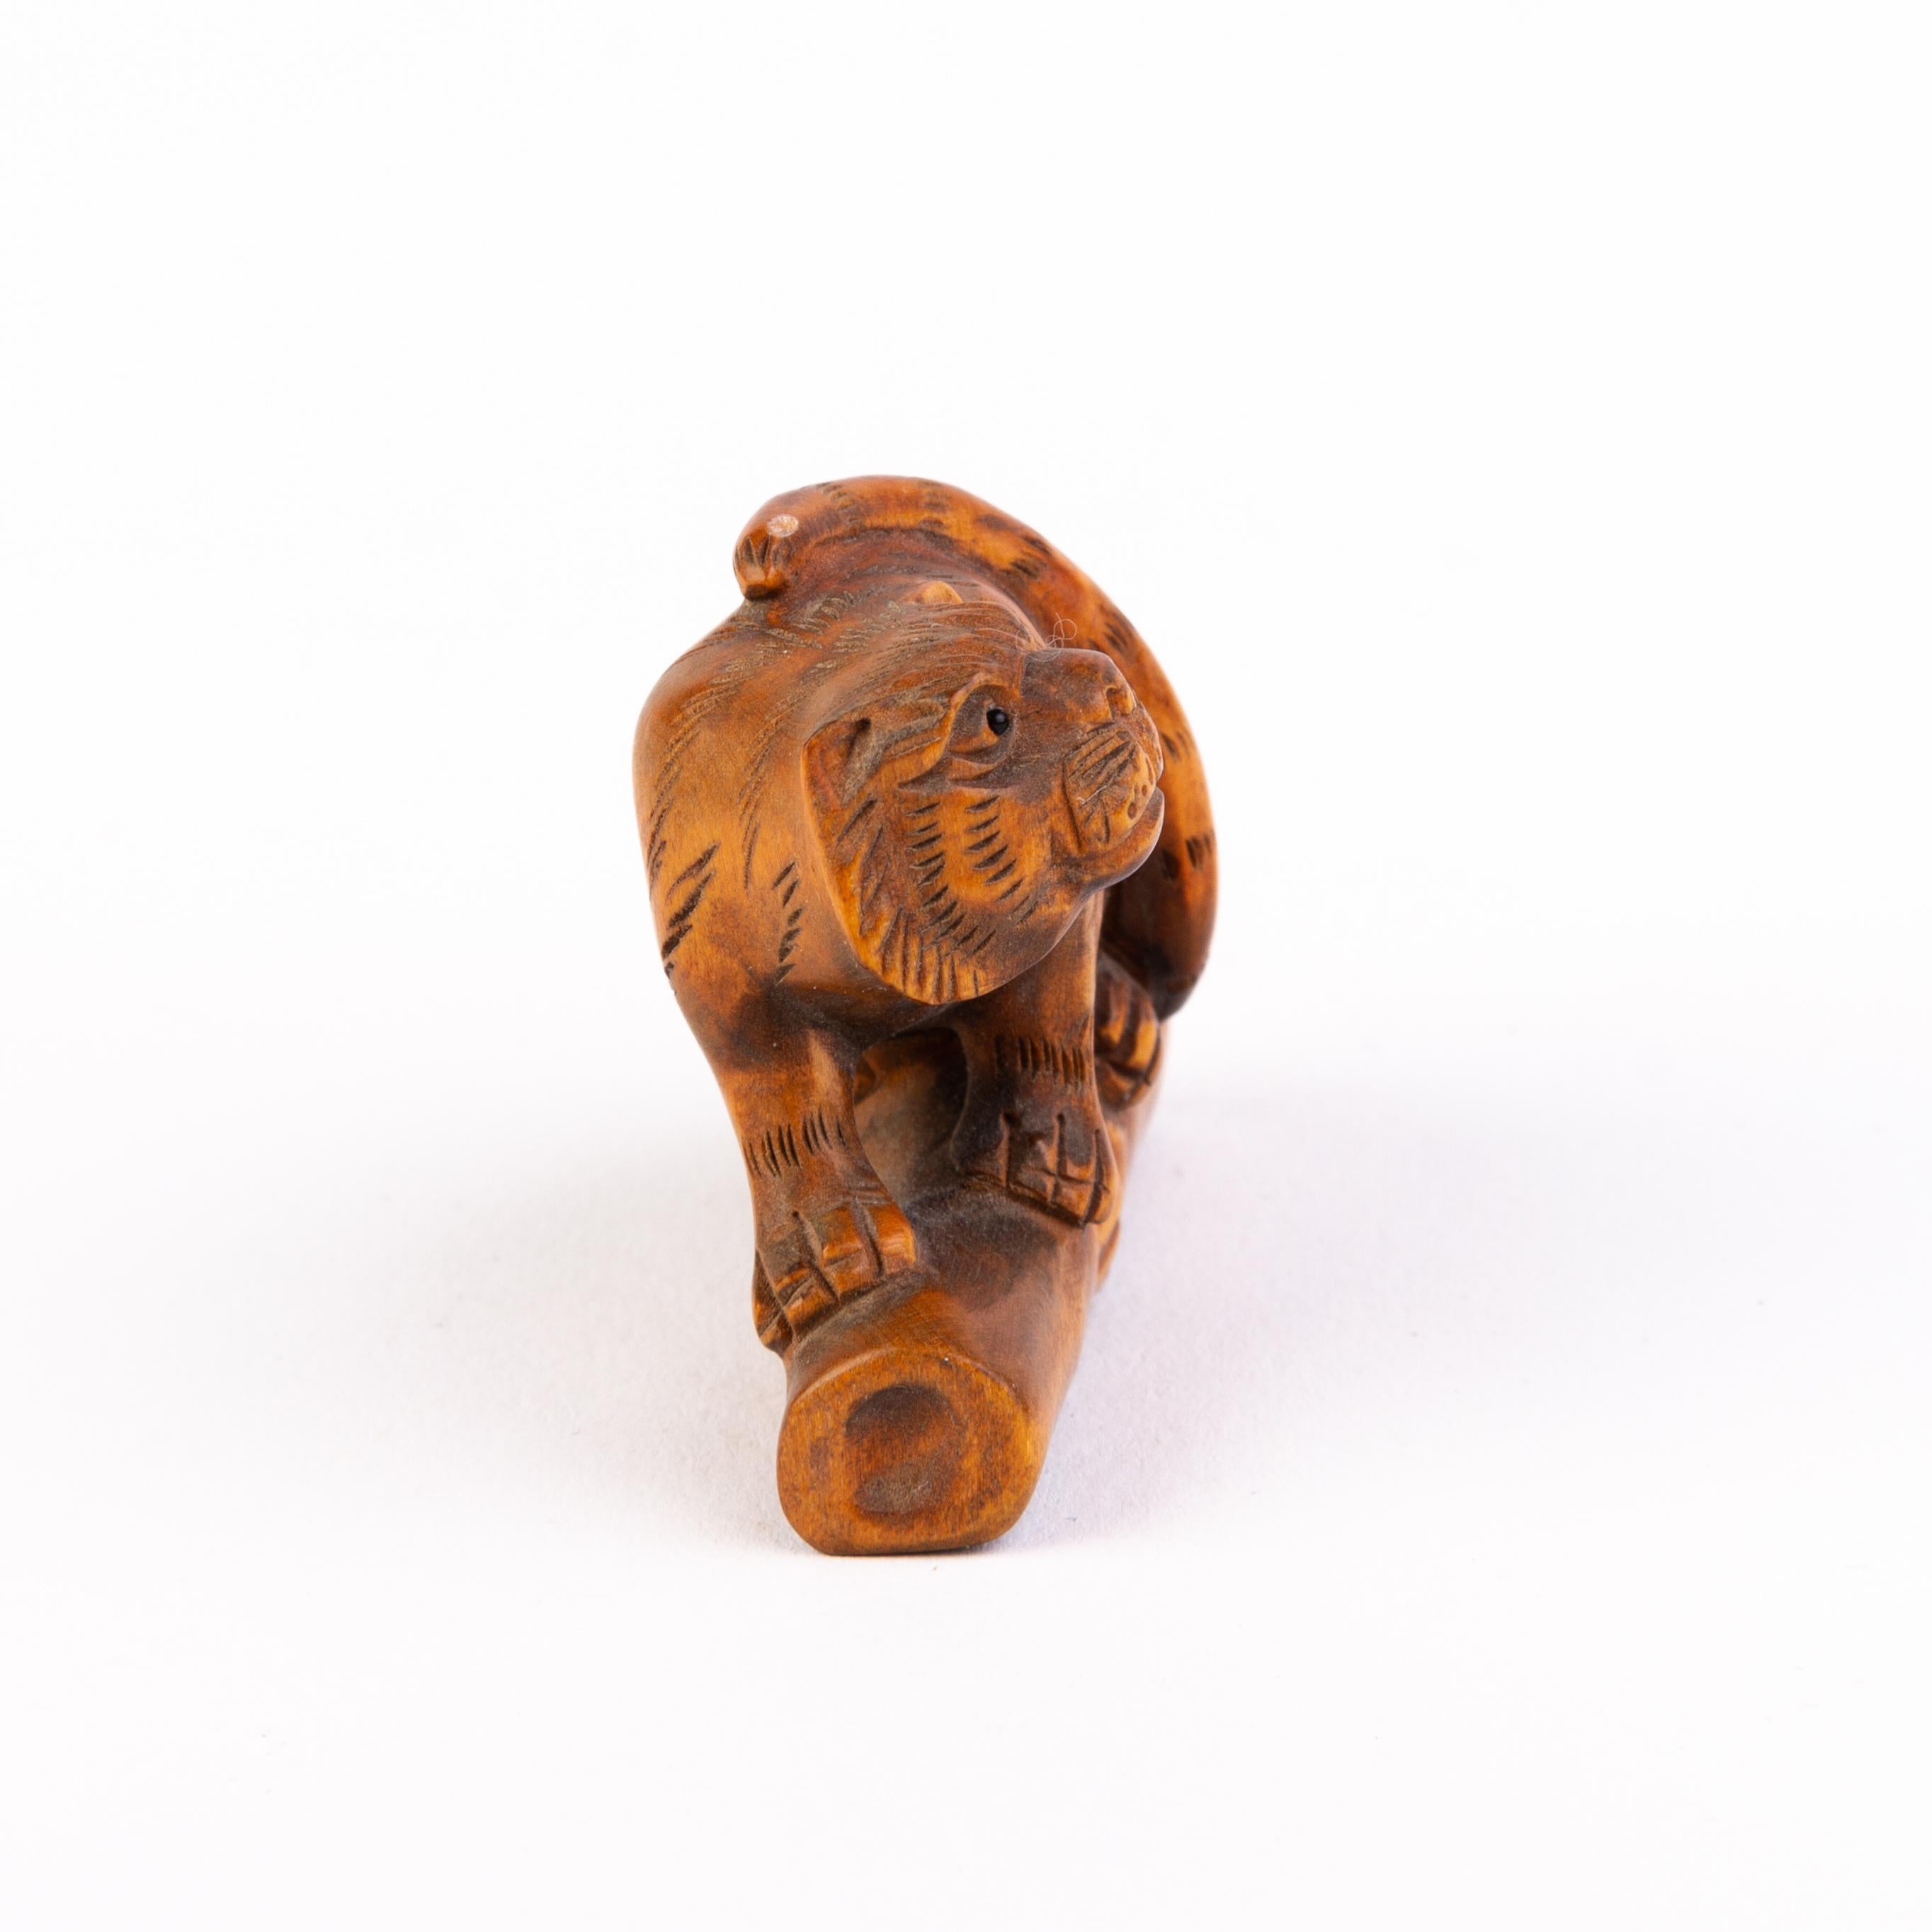 In good condition
From a private collection
Free international shipping
Signed Japanese Boxwood Netsuke Inro of a Tiger 